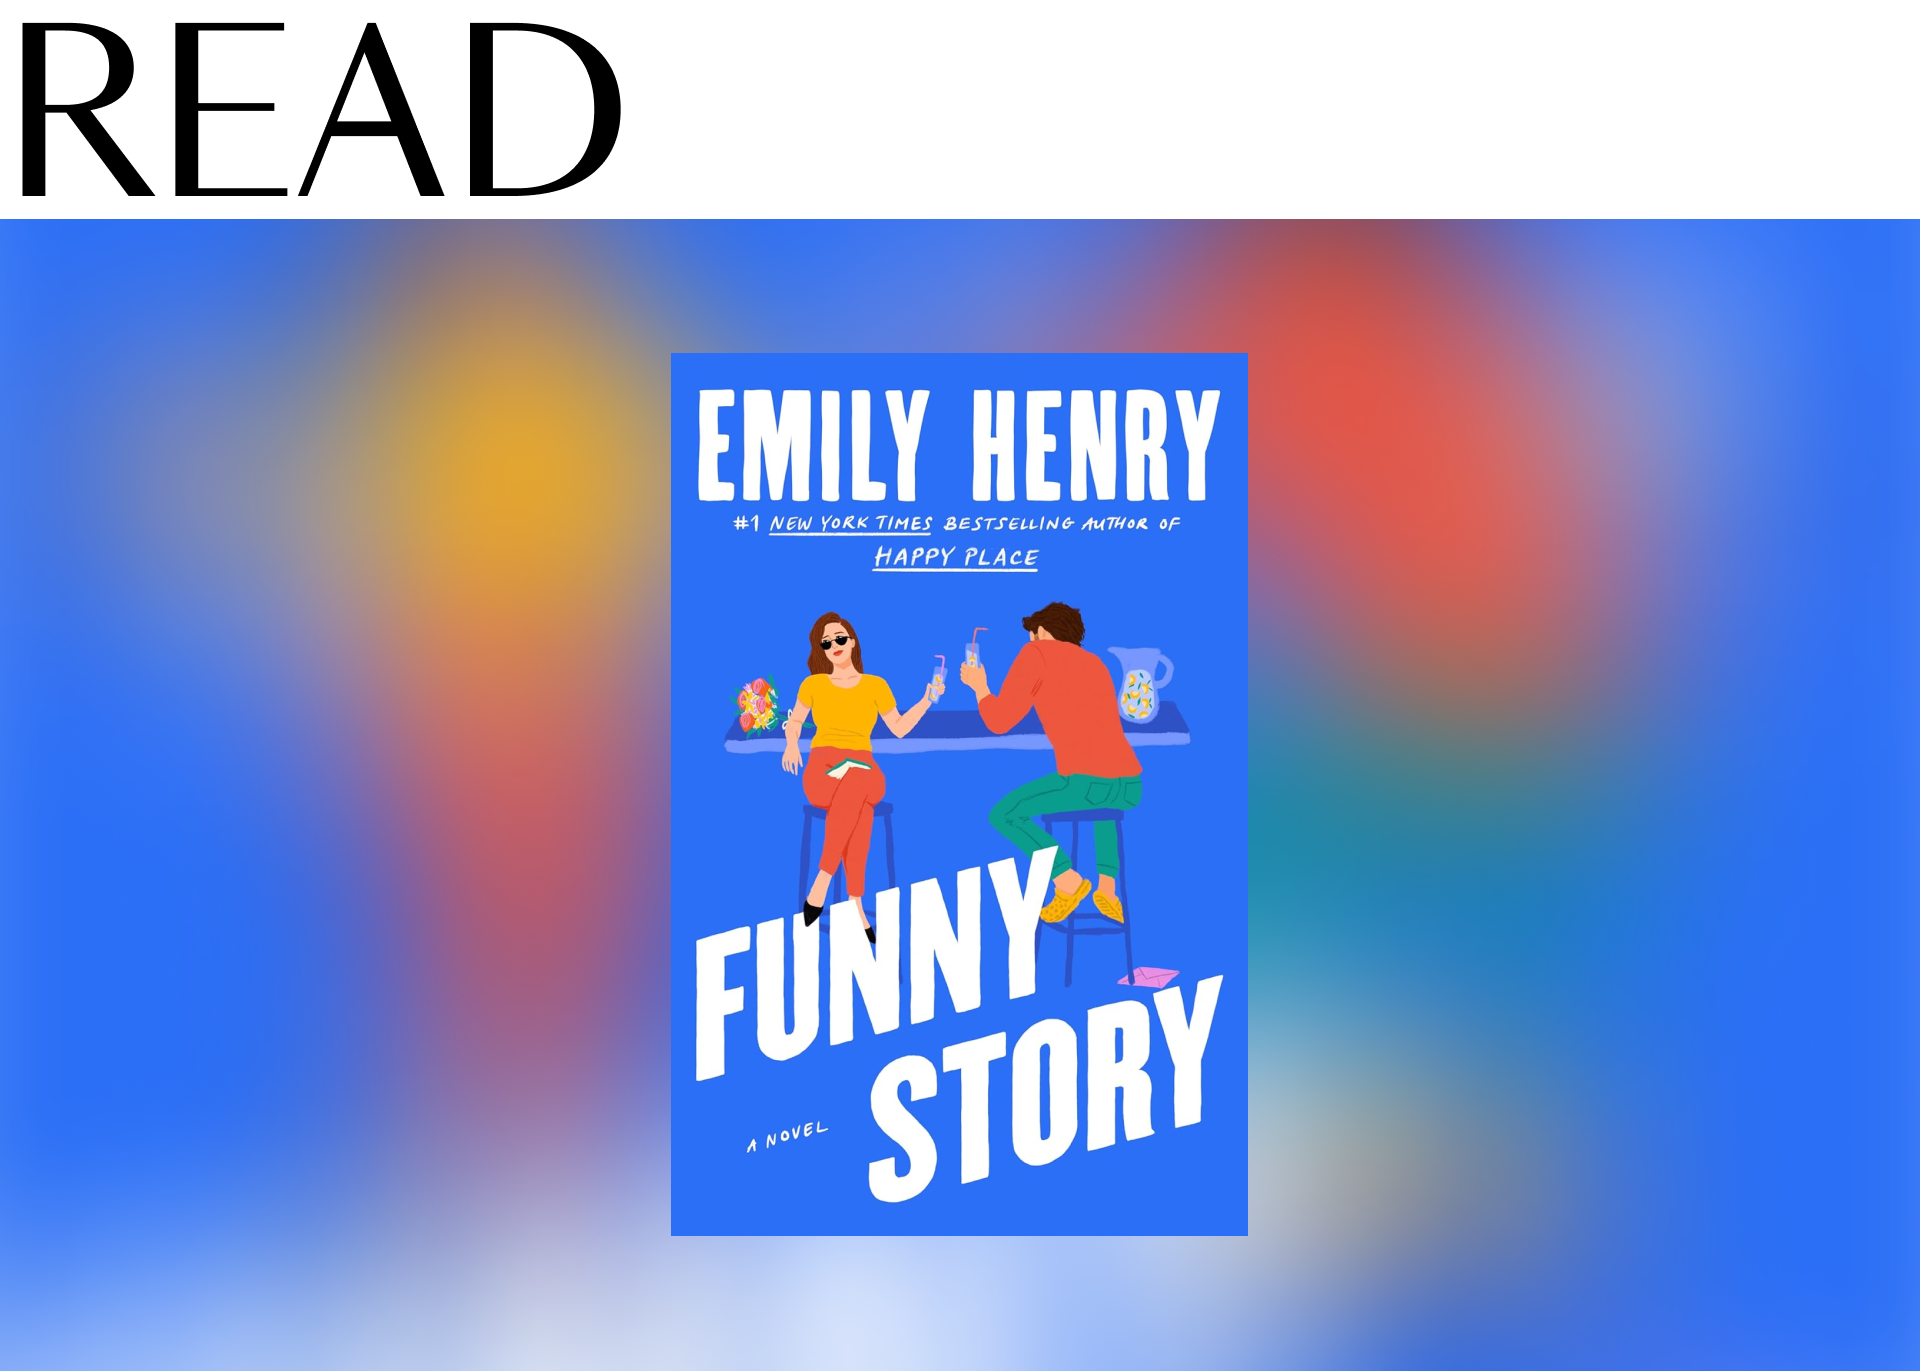 READ: “Funny Story” by Emily Henry